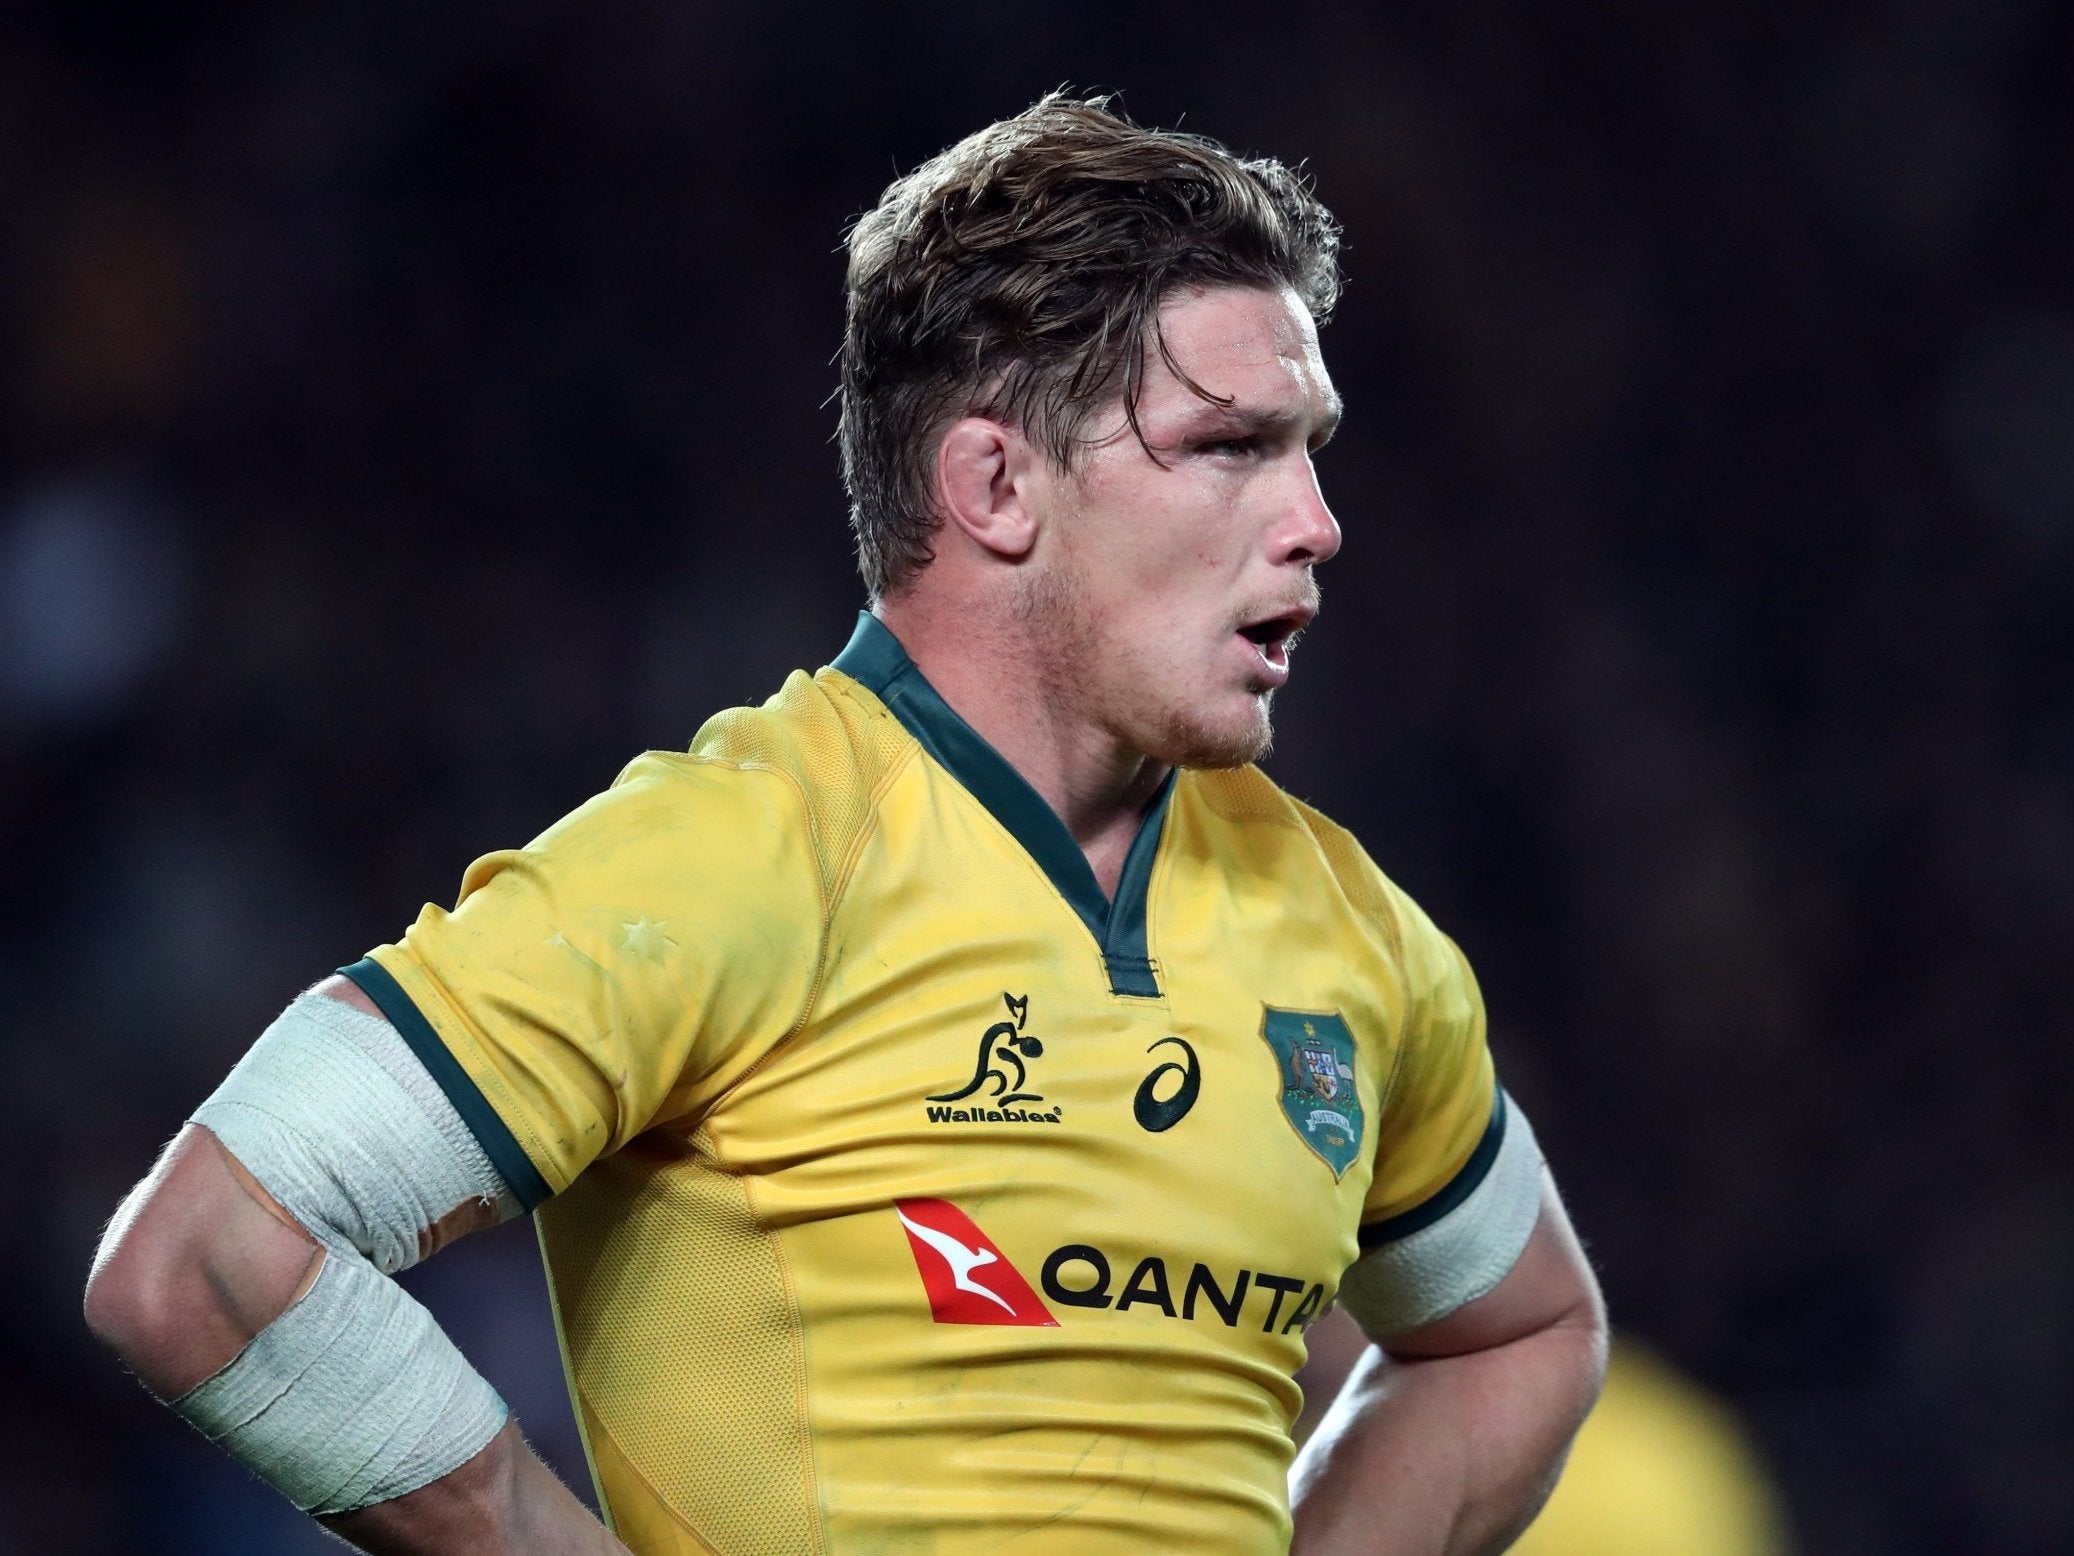 Michael Hooper has been ruled out of Australia's Rugby Championship clash with Argentina